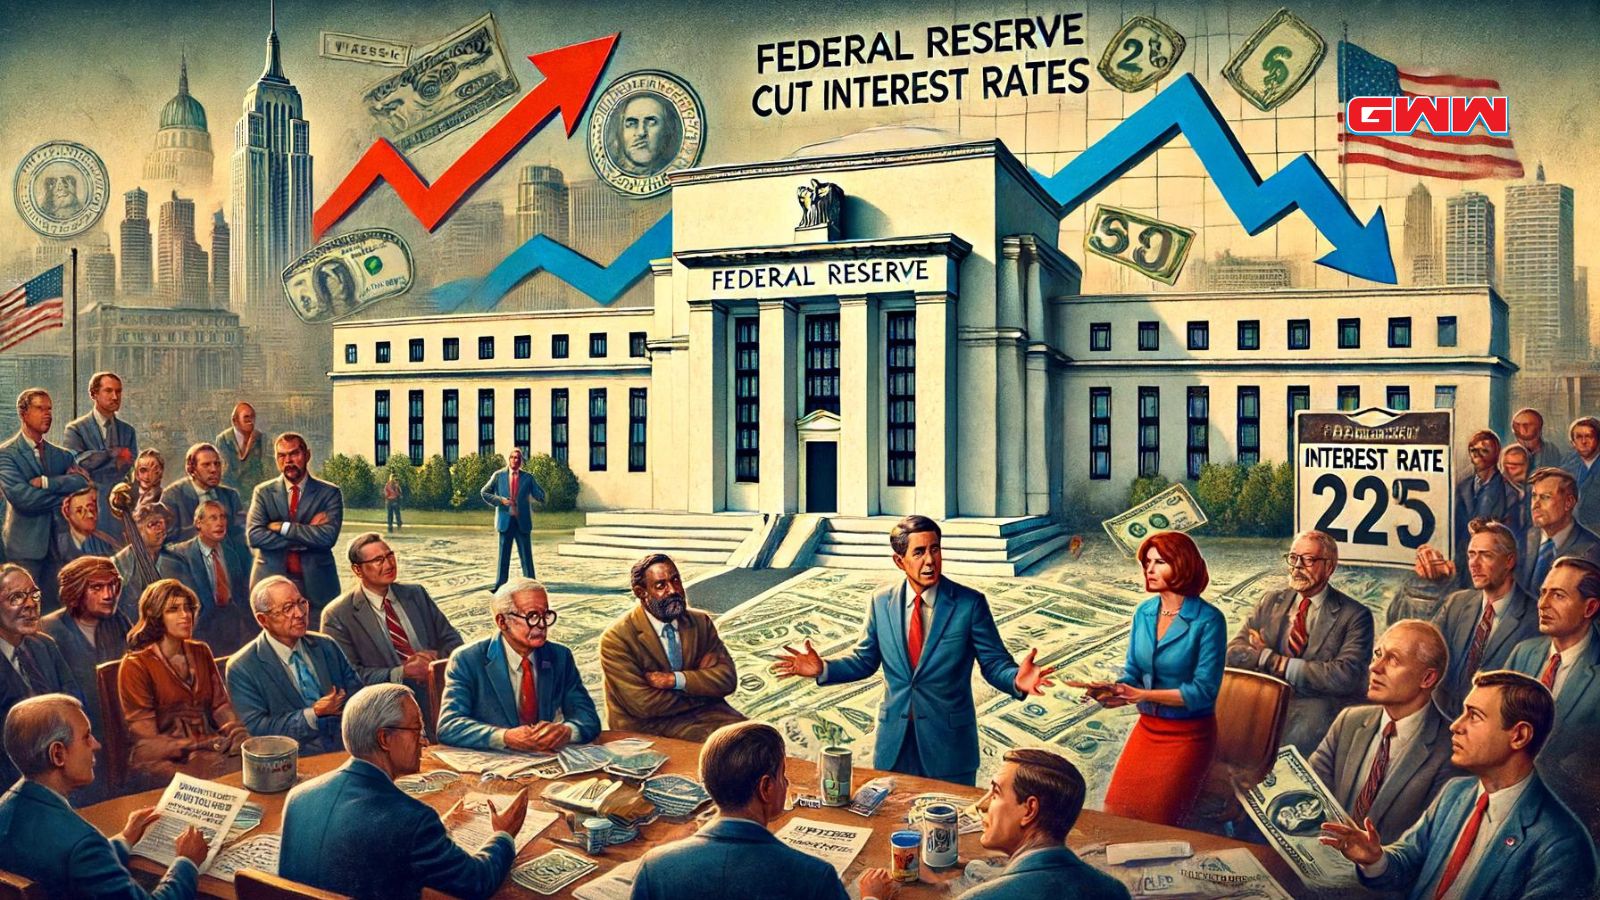 Federal Reserve meeting on interest rate cuts, financial discussions and charts